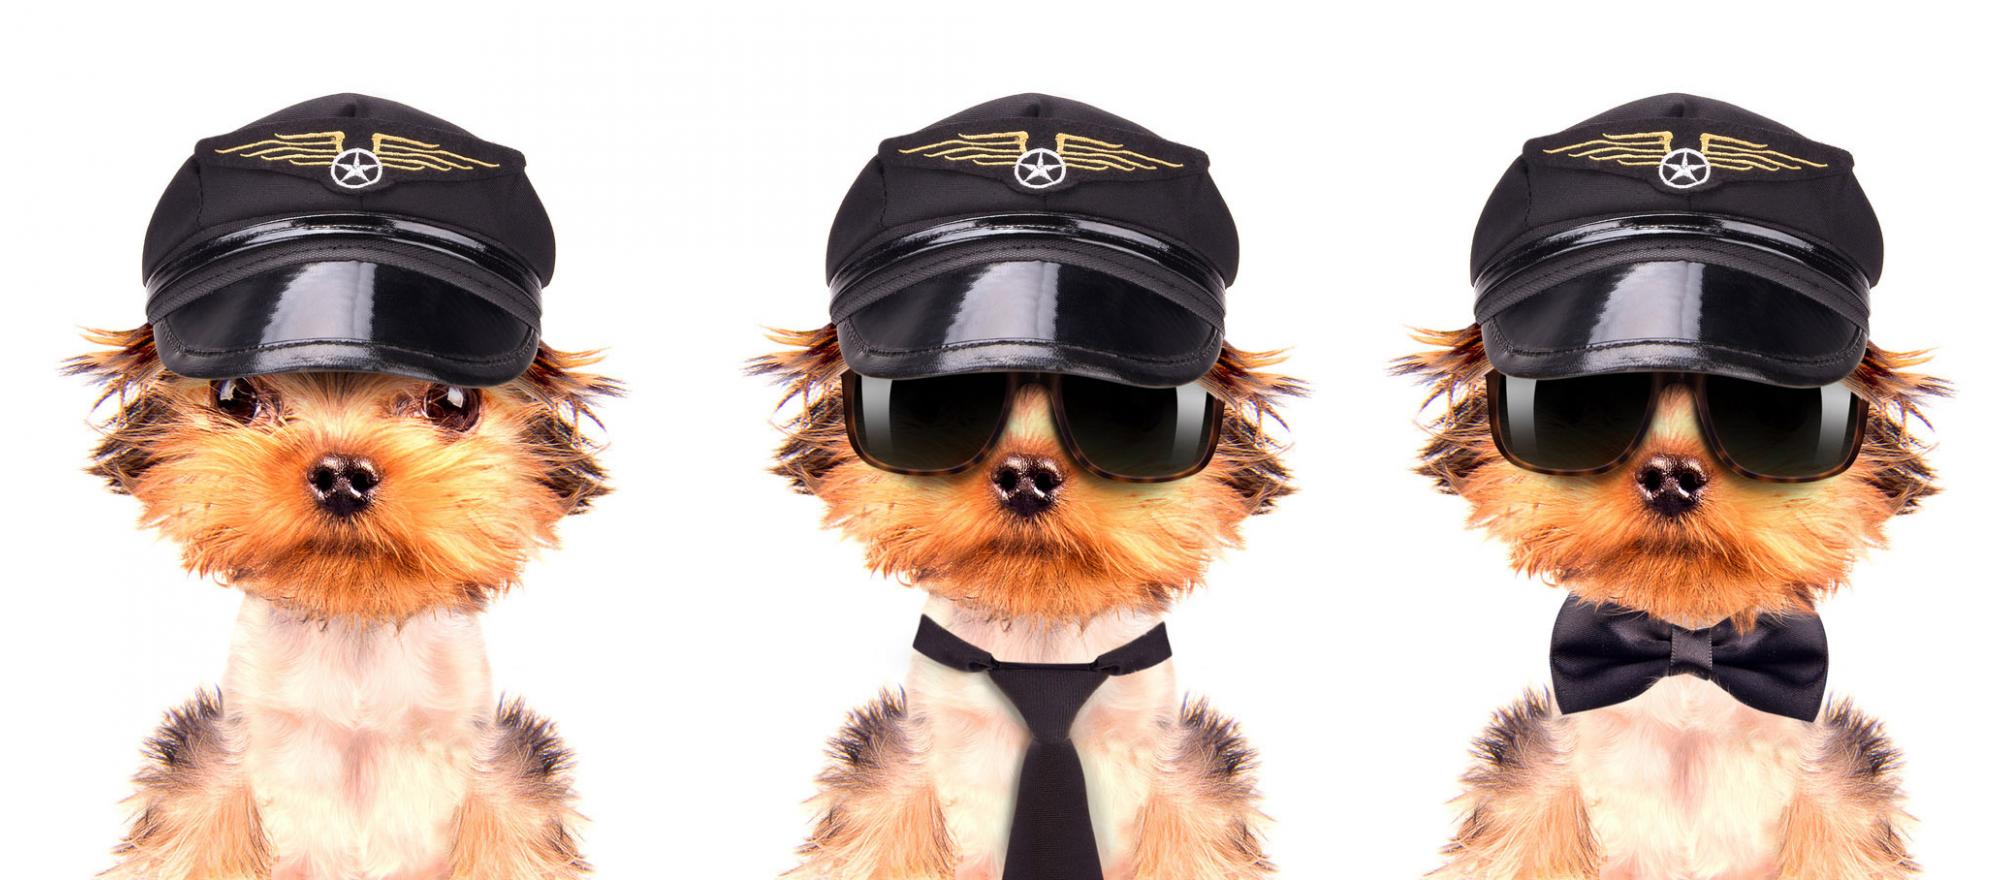 Three dogs with pilot caps.